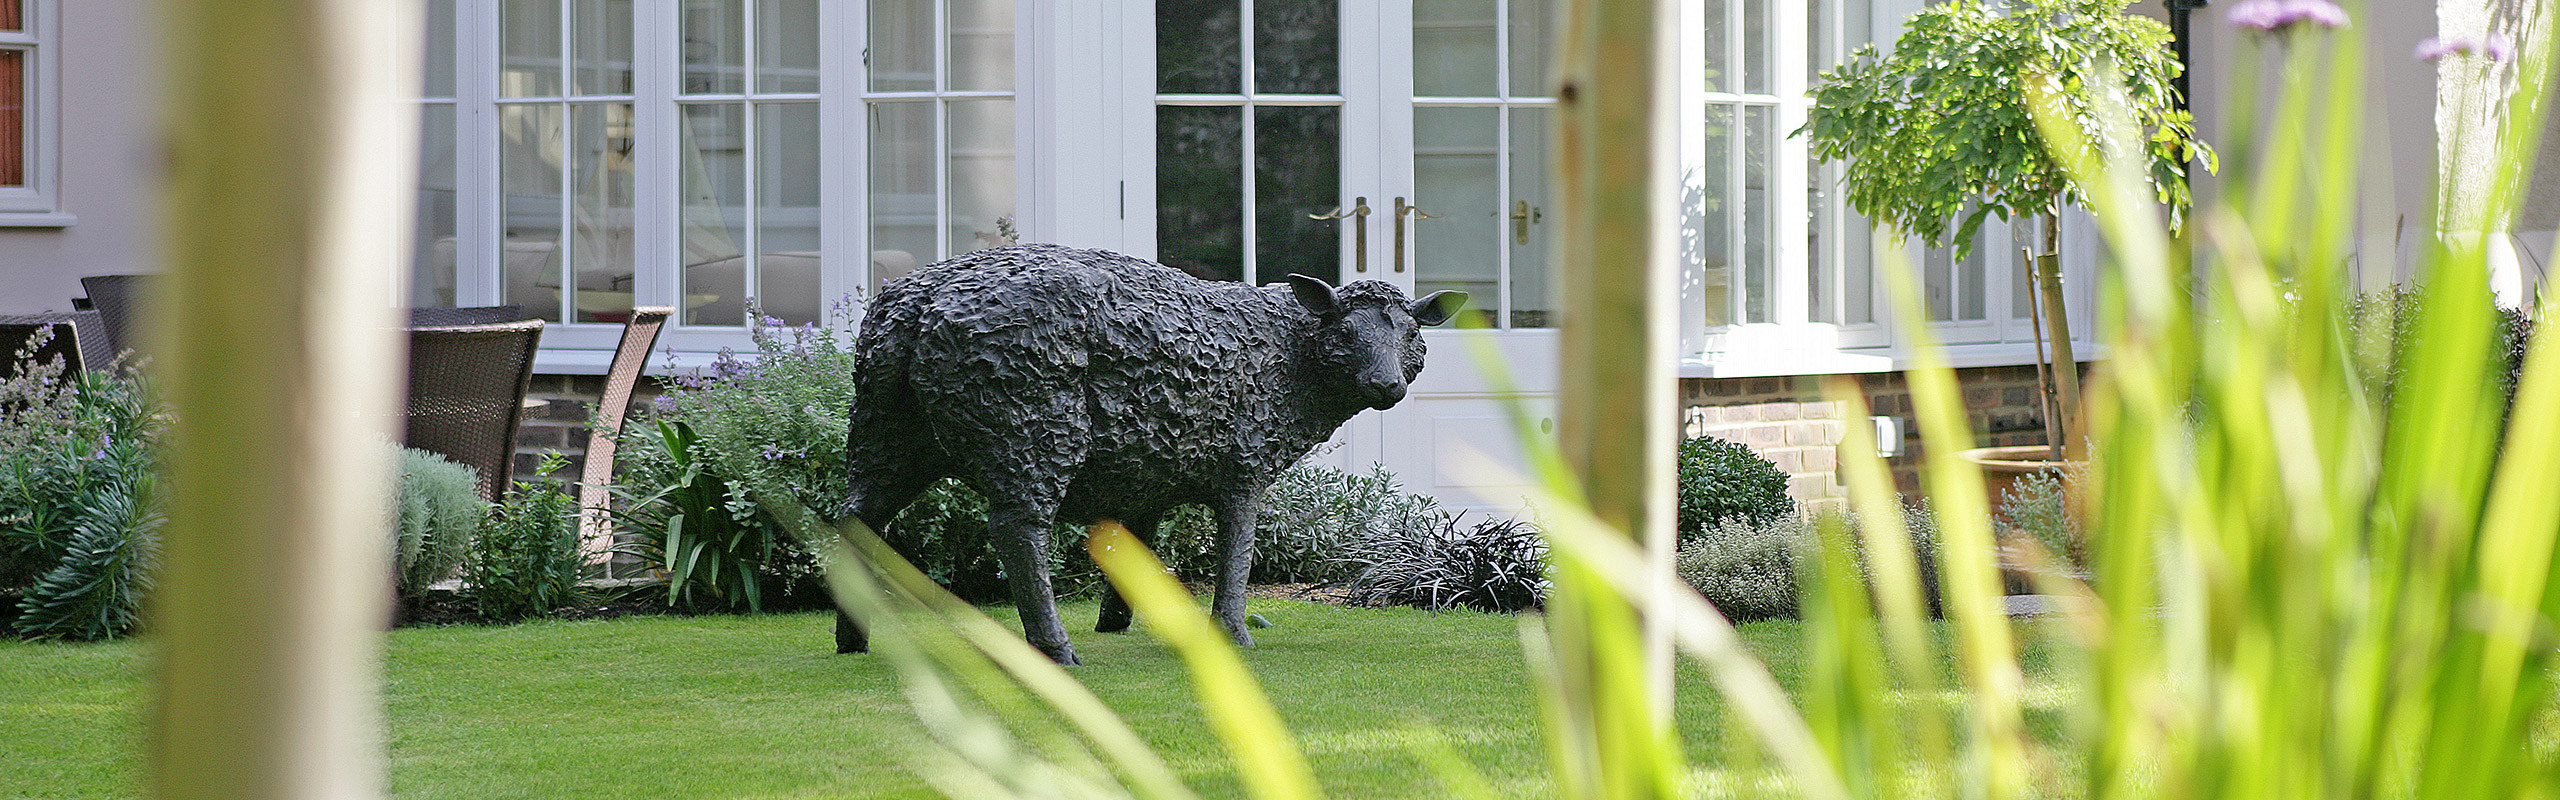 View of the garden of The Dene including sheep sculpture